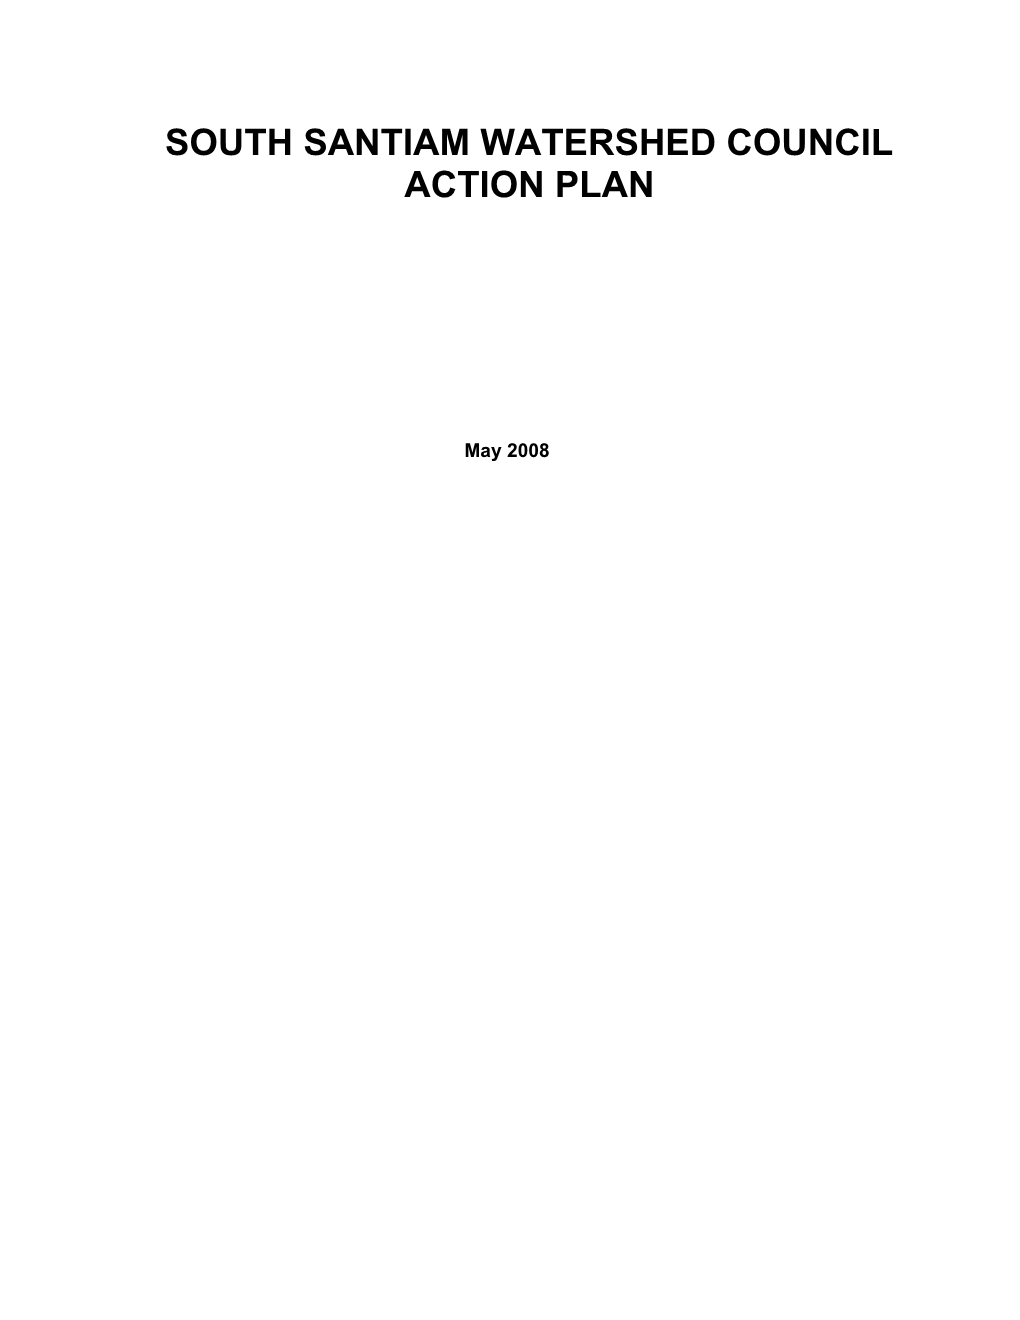 South Santiam Watershed Council Action Plan